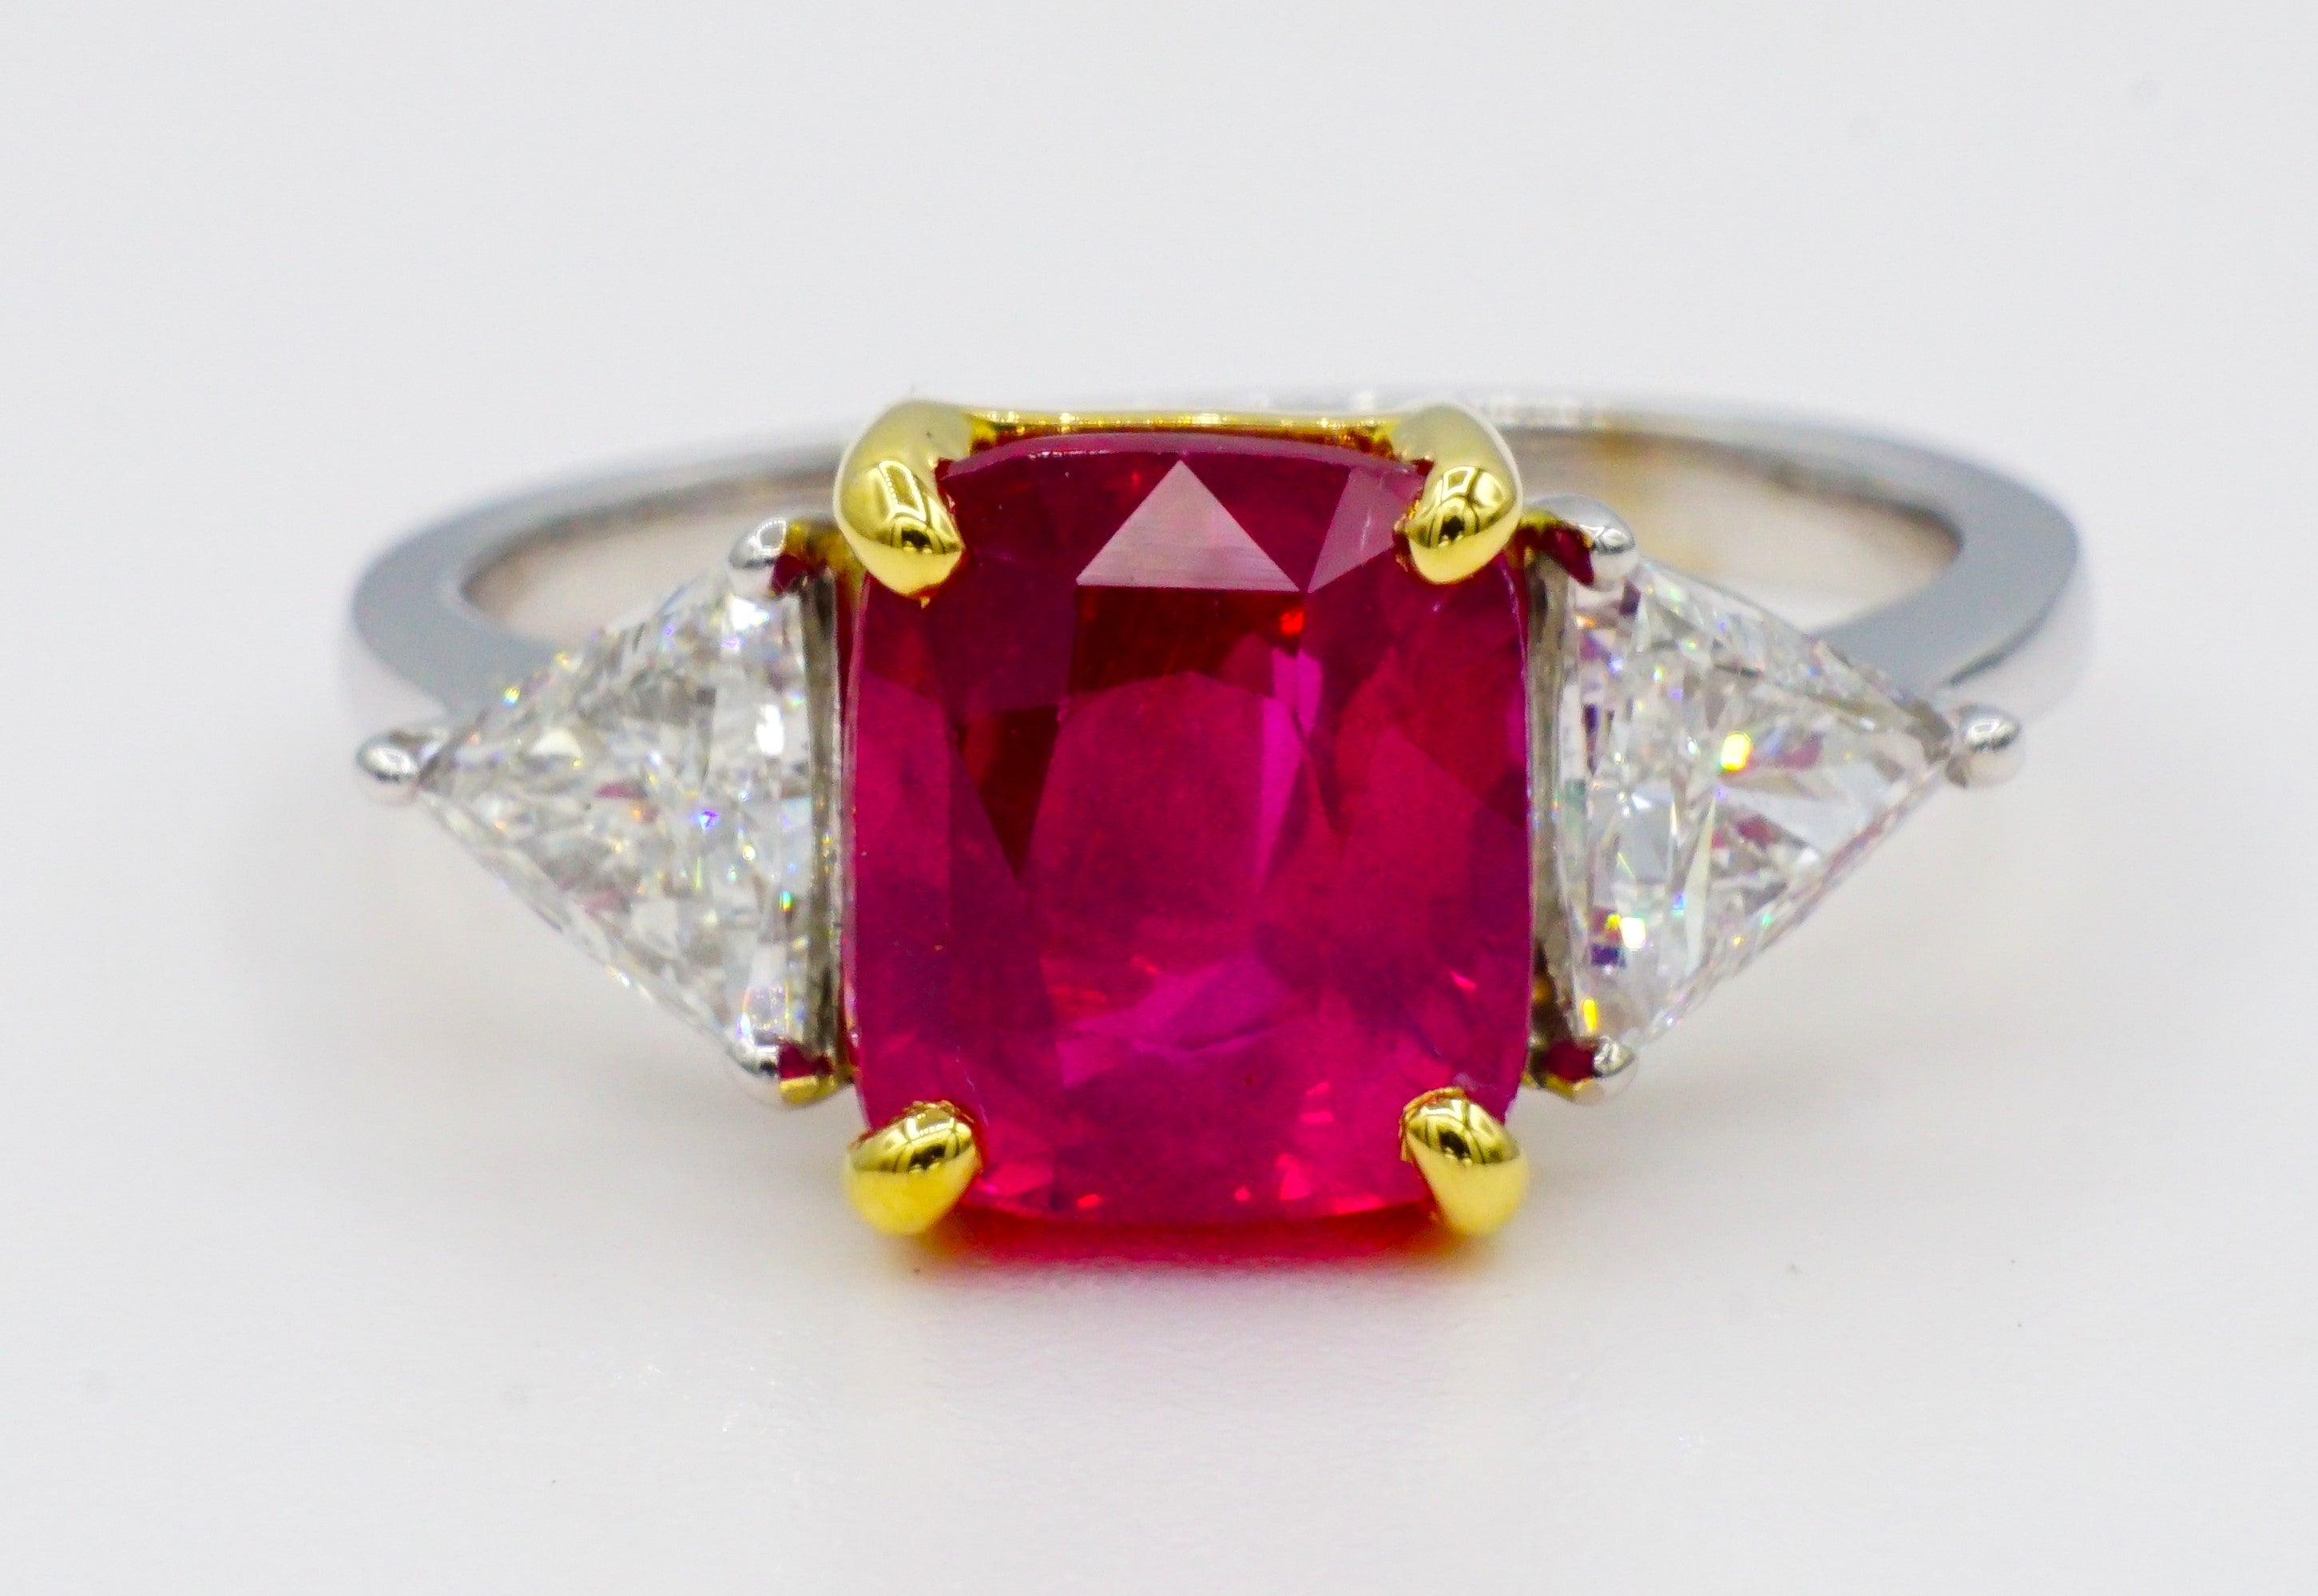 Stunning 18kt yellow gold two-tone ring with a natural GIA certified 3.01ct cushion cut ruby accented with two trilliant cut diamonds that are .80cttw. 

The ruby measurement is 8.32 x 7.2 x 5.00 mm and has GIA report #6227370047. The ruby is in a